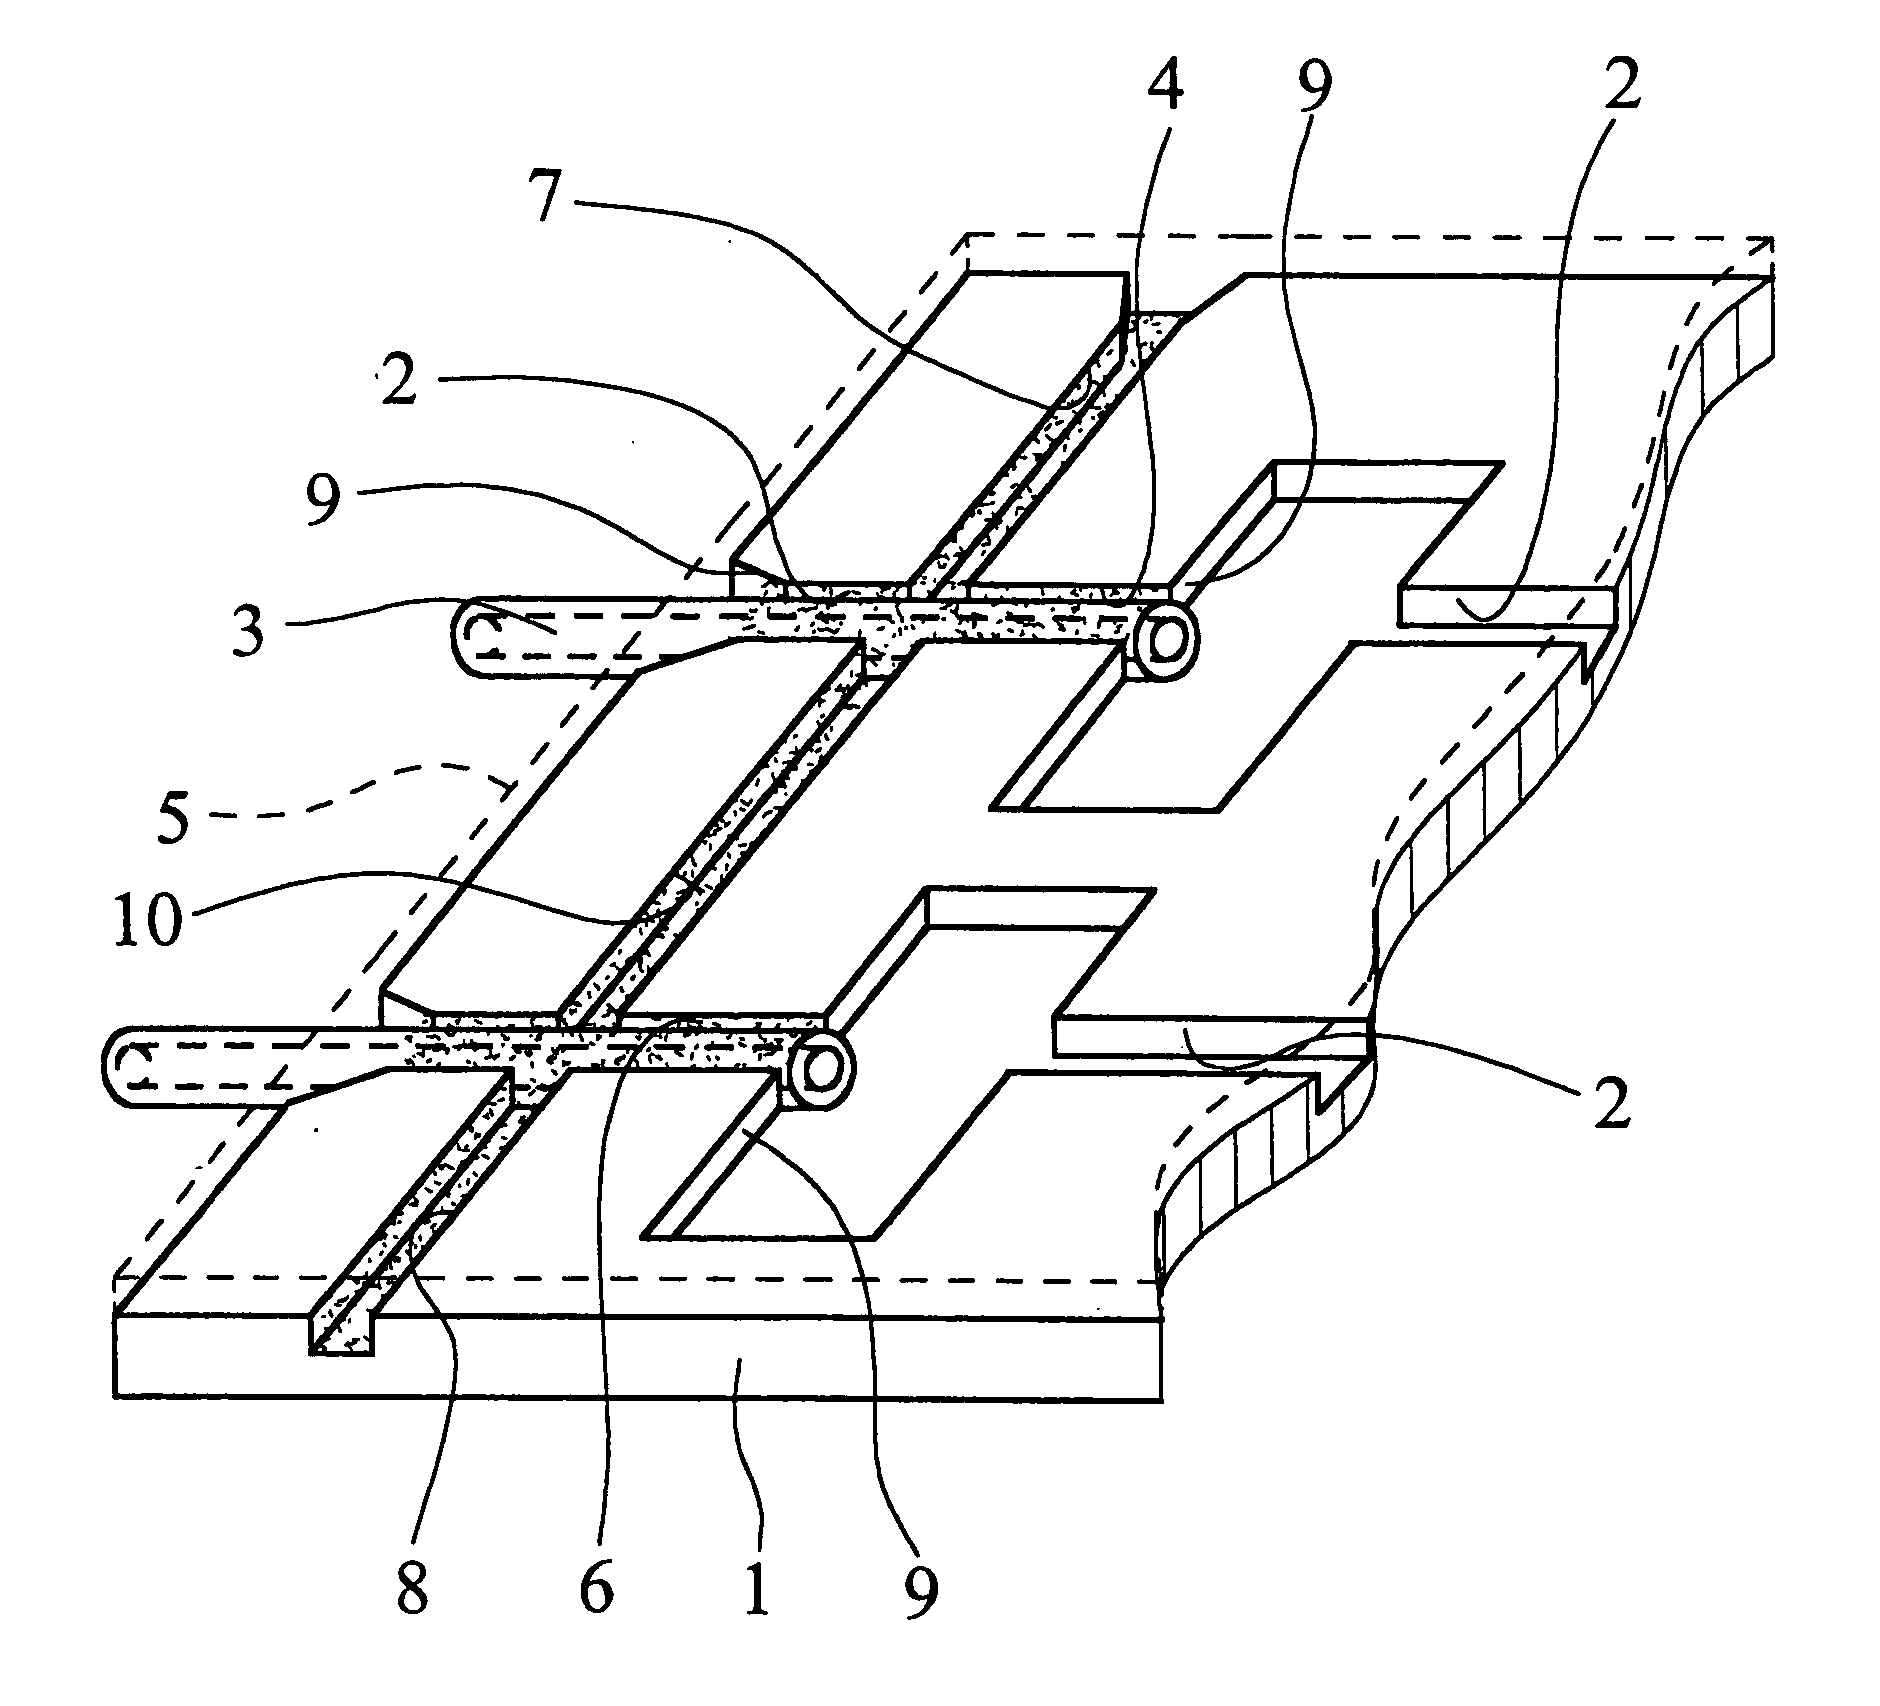 Process and device for coupling hollow fibers to a microfluidic network